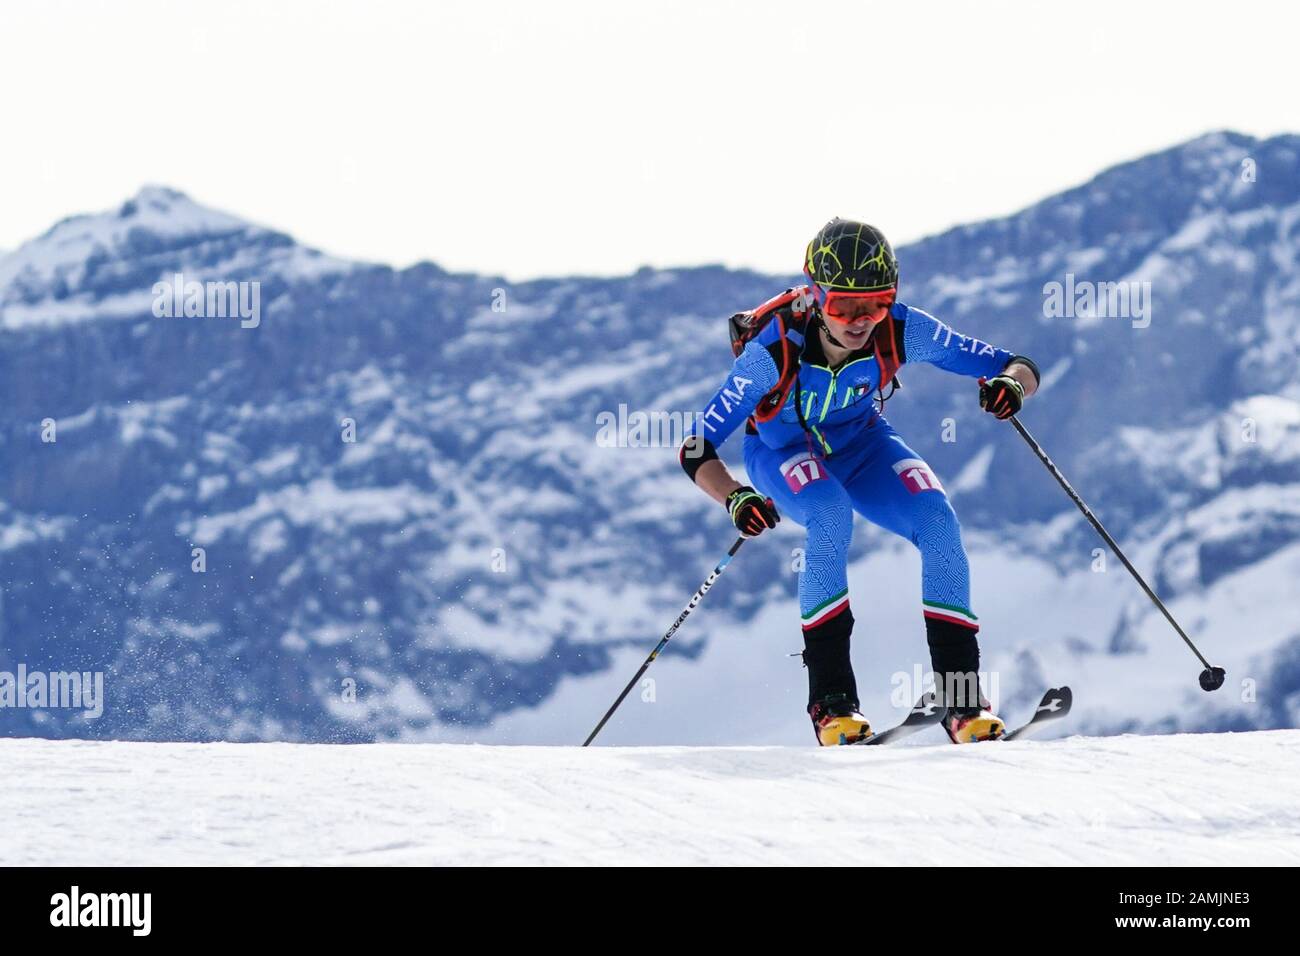 Villars. 13th Jan, 2020. Luca Tomasoni of Italy competes during the men's sprint of ski mountaineering at the 3rd Winter Youth Olympic Games at Villars Winter Park in Villars, Switzerland on Jan. 13, 2020. Credit: Bai Xueqi/Xinhua/Alamy Live News Stock Photo